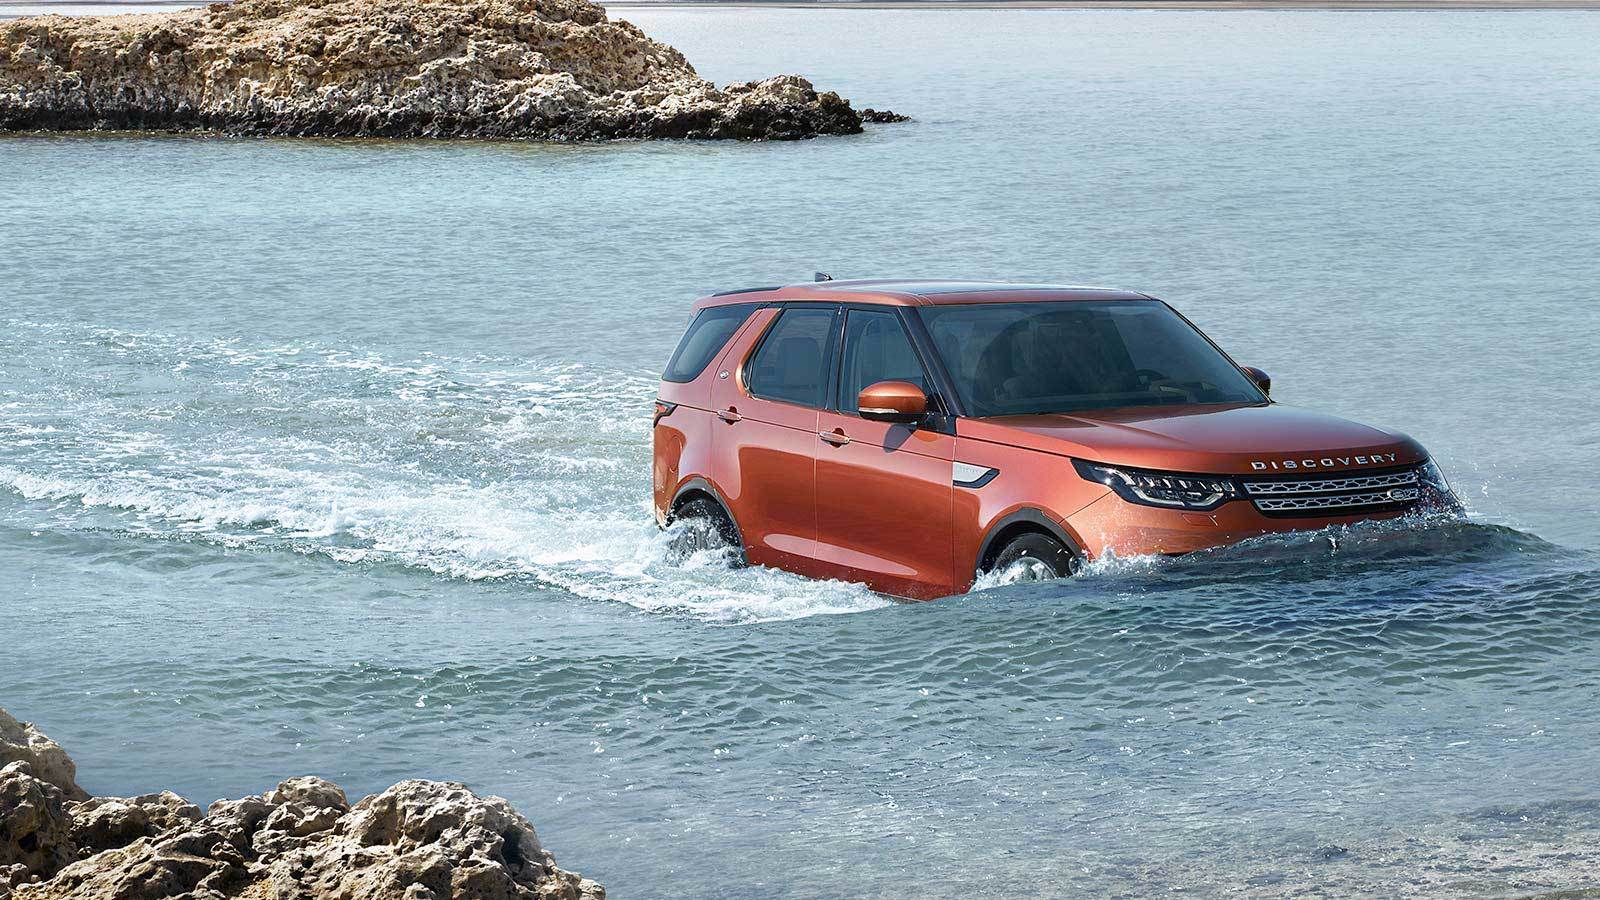 Land Rover Discovery Off-road Driving Multi Purpose Vehicle